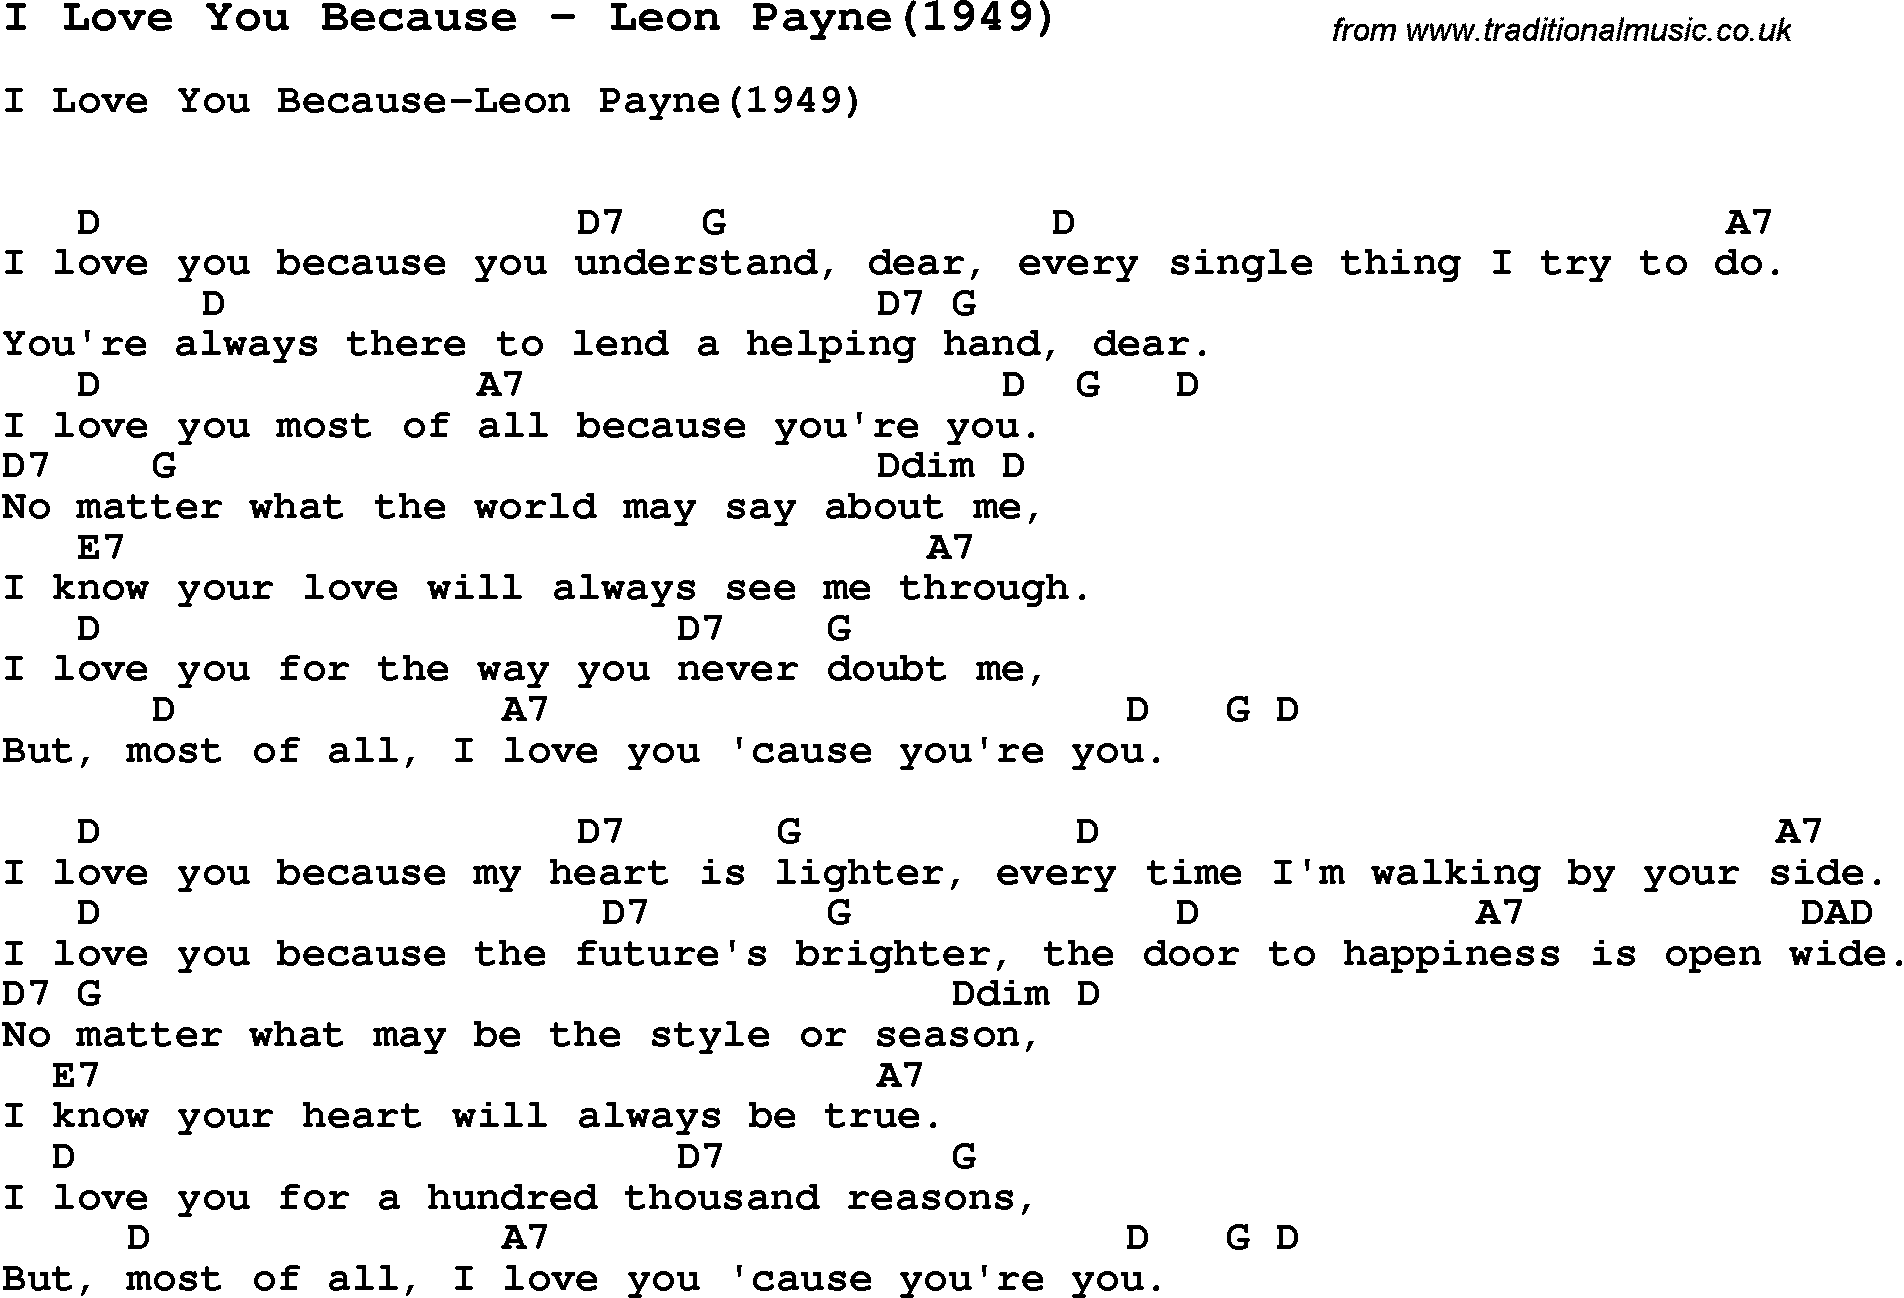 Song I Love You Because by Leon Payne(1949), with lyrics for vocal performance and accompaniment chords for Ukulele, Guitar Banjo etc.